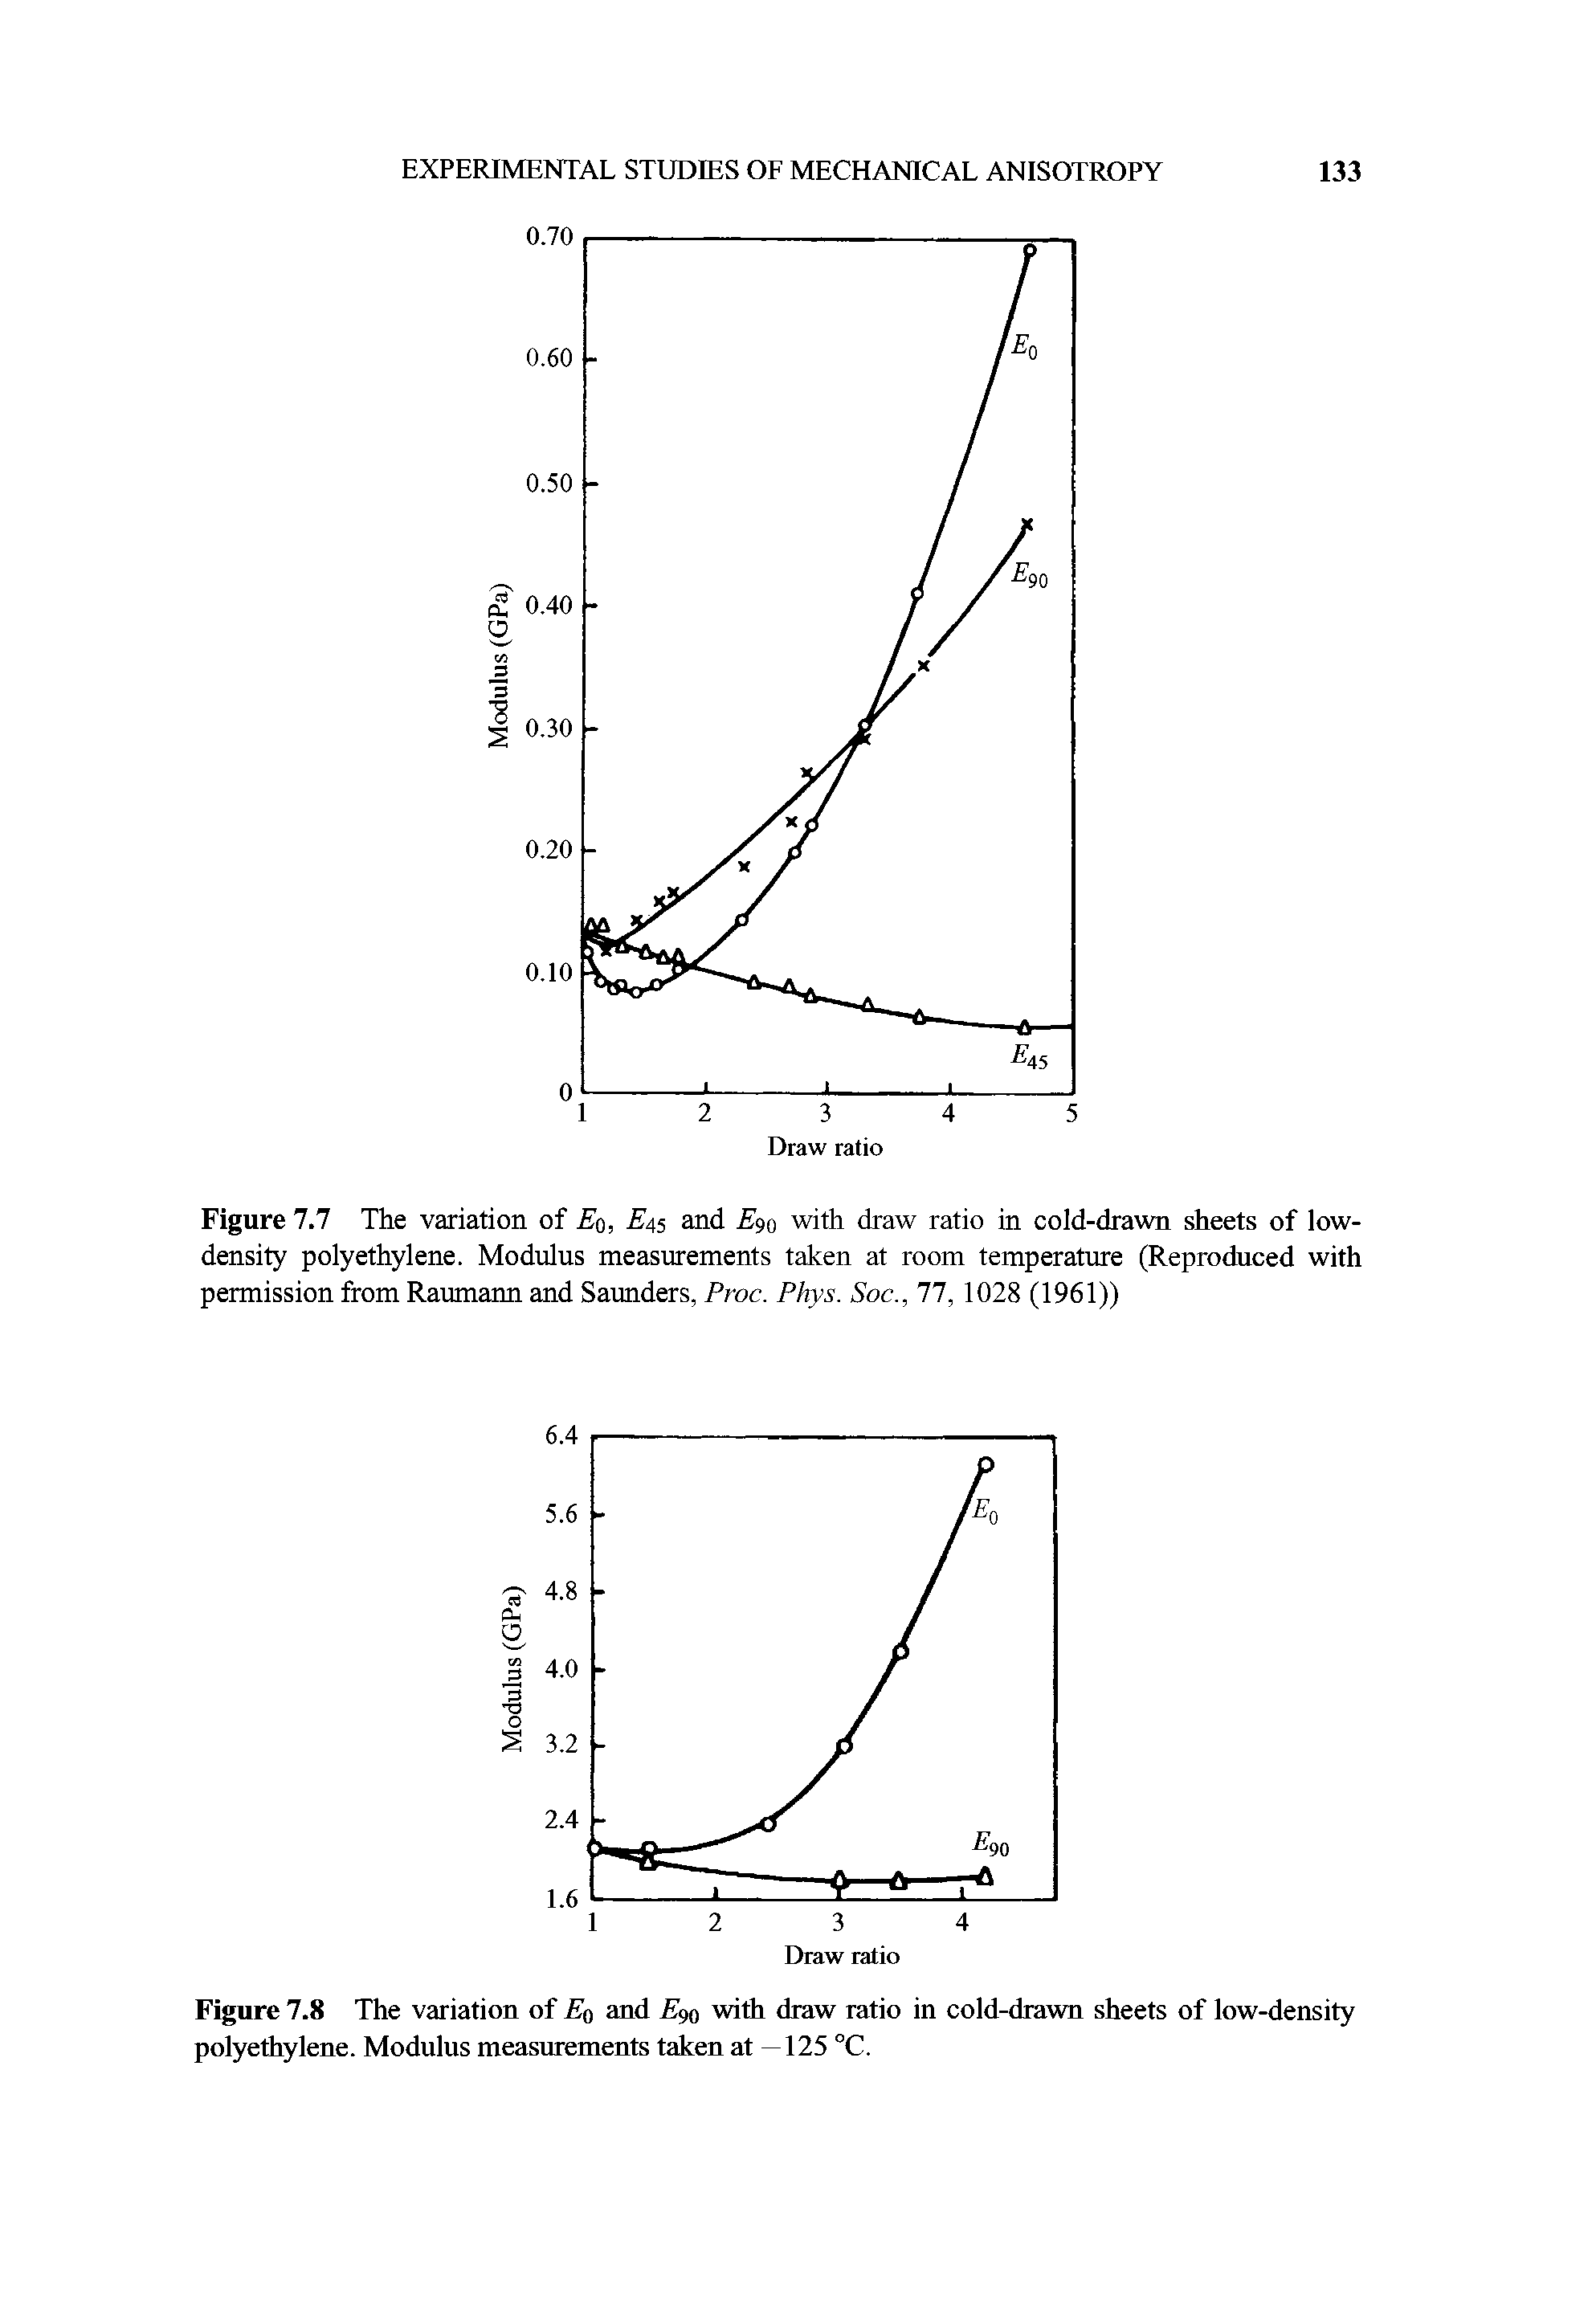 Figure 7.7 The variation of Eq, 45 and 90 with draw ratio in cold-drawn sheets of low-density polyethylene. Modulus measurements taken at room temperature (Reproduced with permission from Raumann and Saunders, Proc. Phys. Soc., 11, 1028 (1961))...